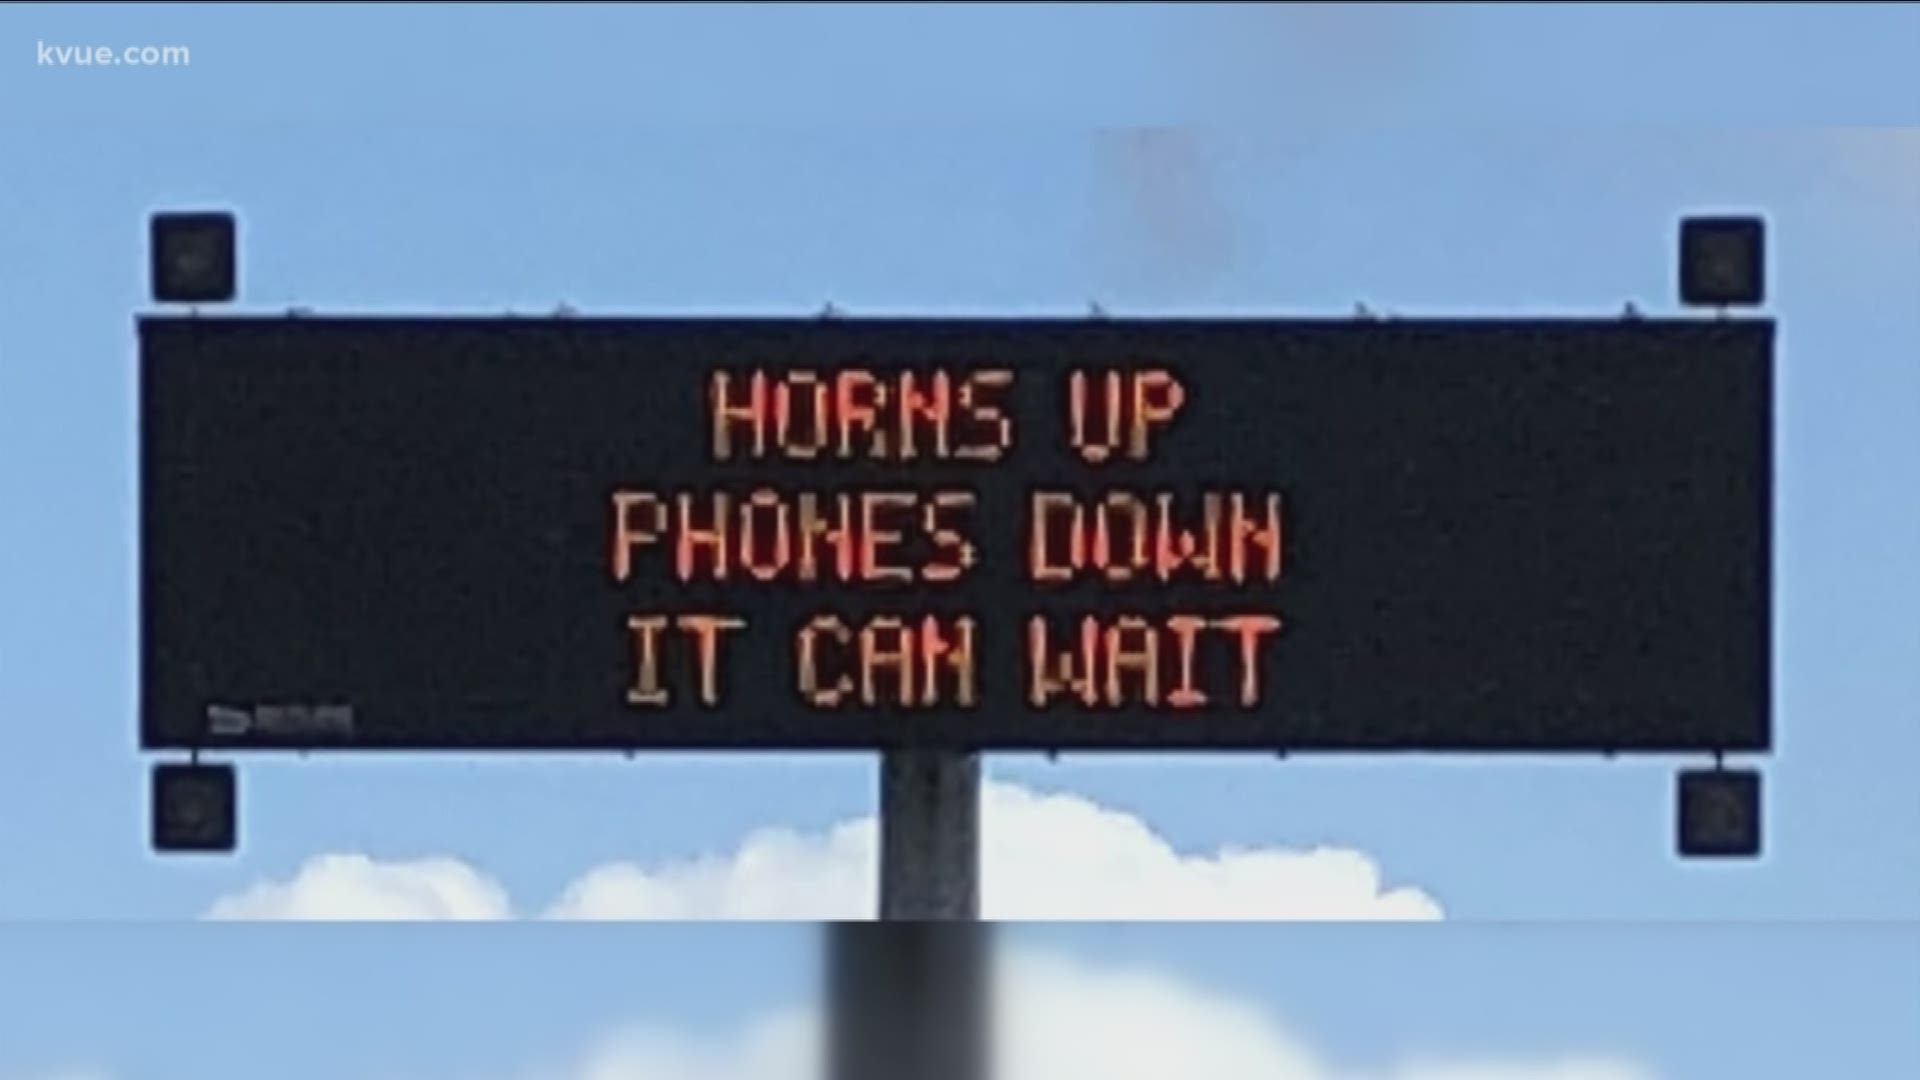 Getting on the road, you might be looking for signs for your next exit or what other people are doing on the road. But when you're on the road, have you ever looked at one of those signs that say how long till your destination or what construction is comi